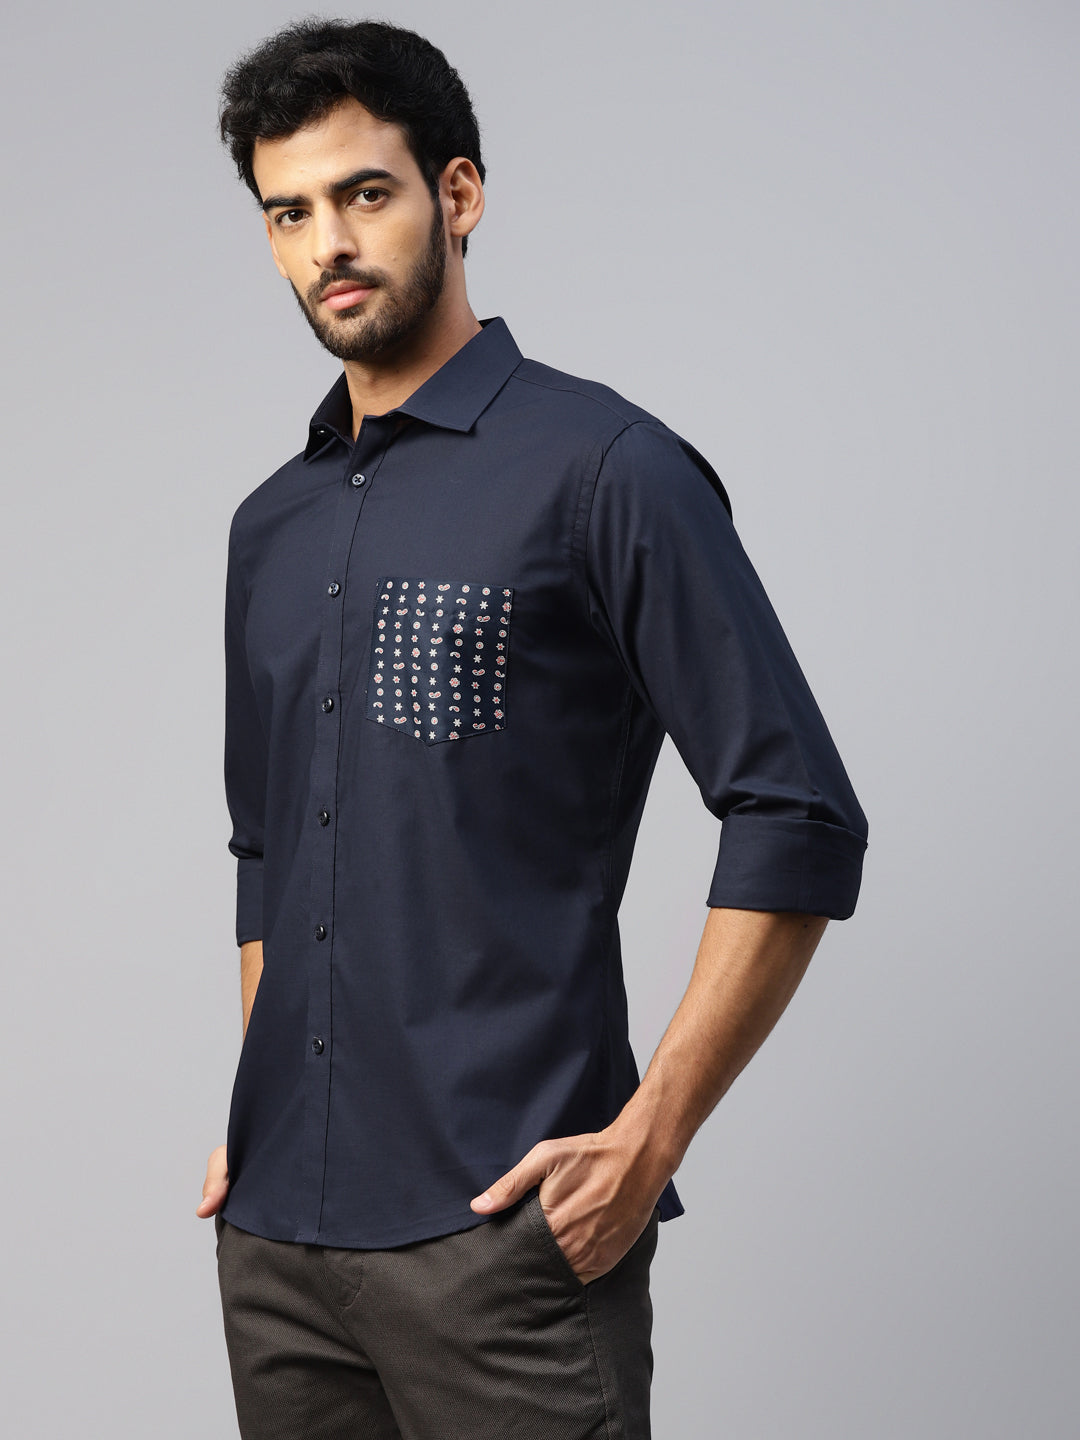 Don Vino Navy Blue Slim Fit Shirt With Contrast Pockets for Men